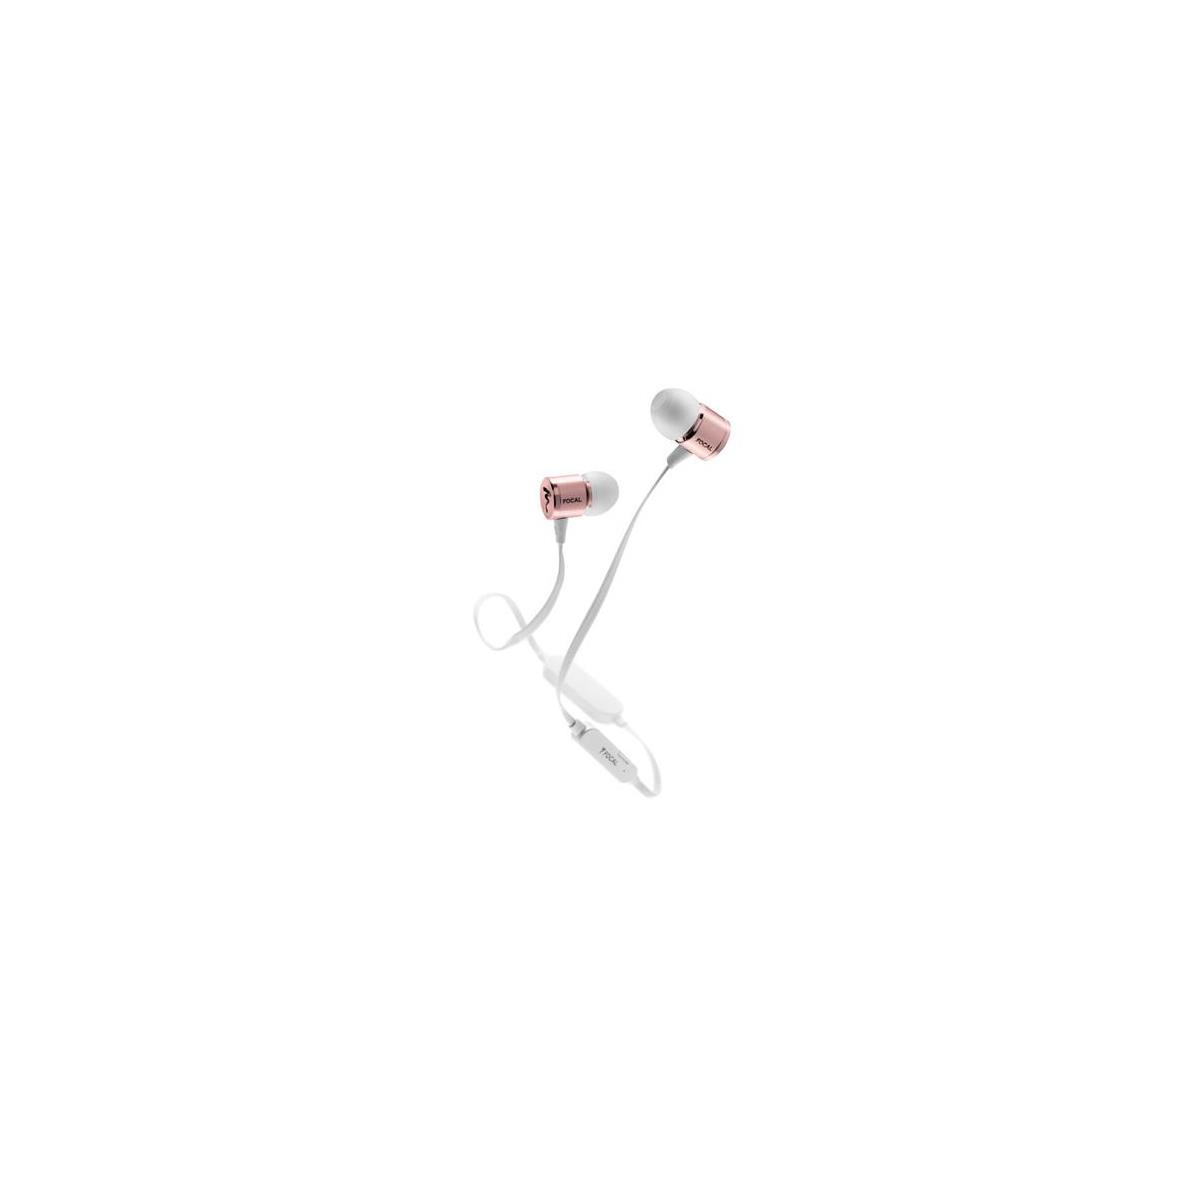 Image of Focal Spark Wireless Bluetooth In-Ear Headphones with Mic